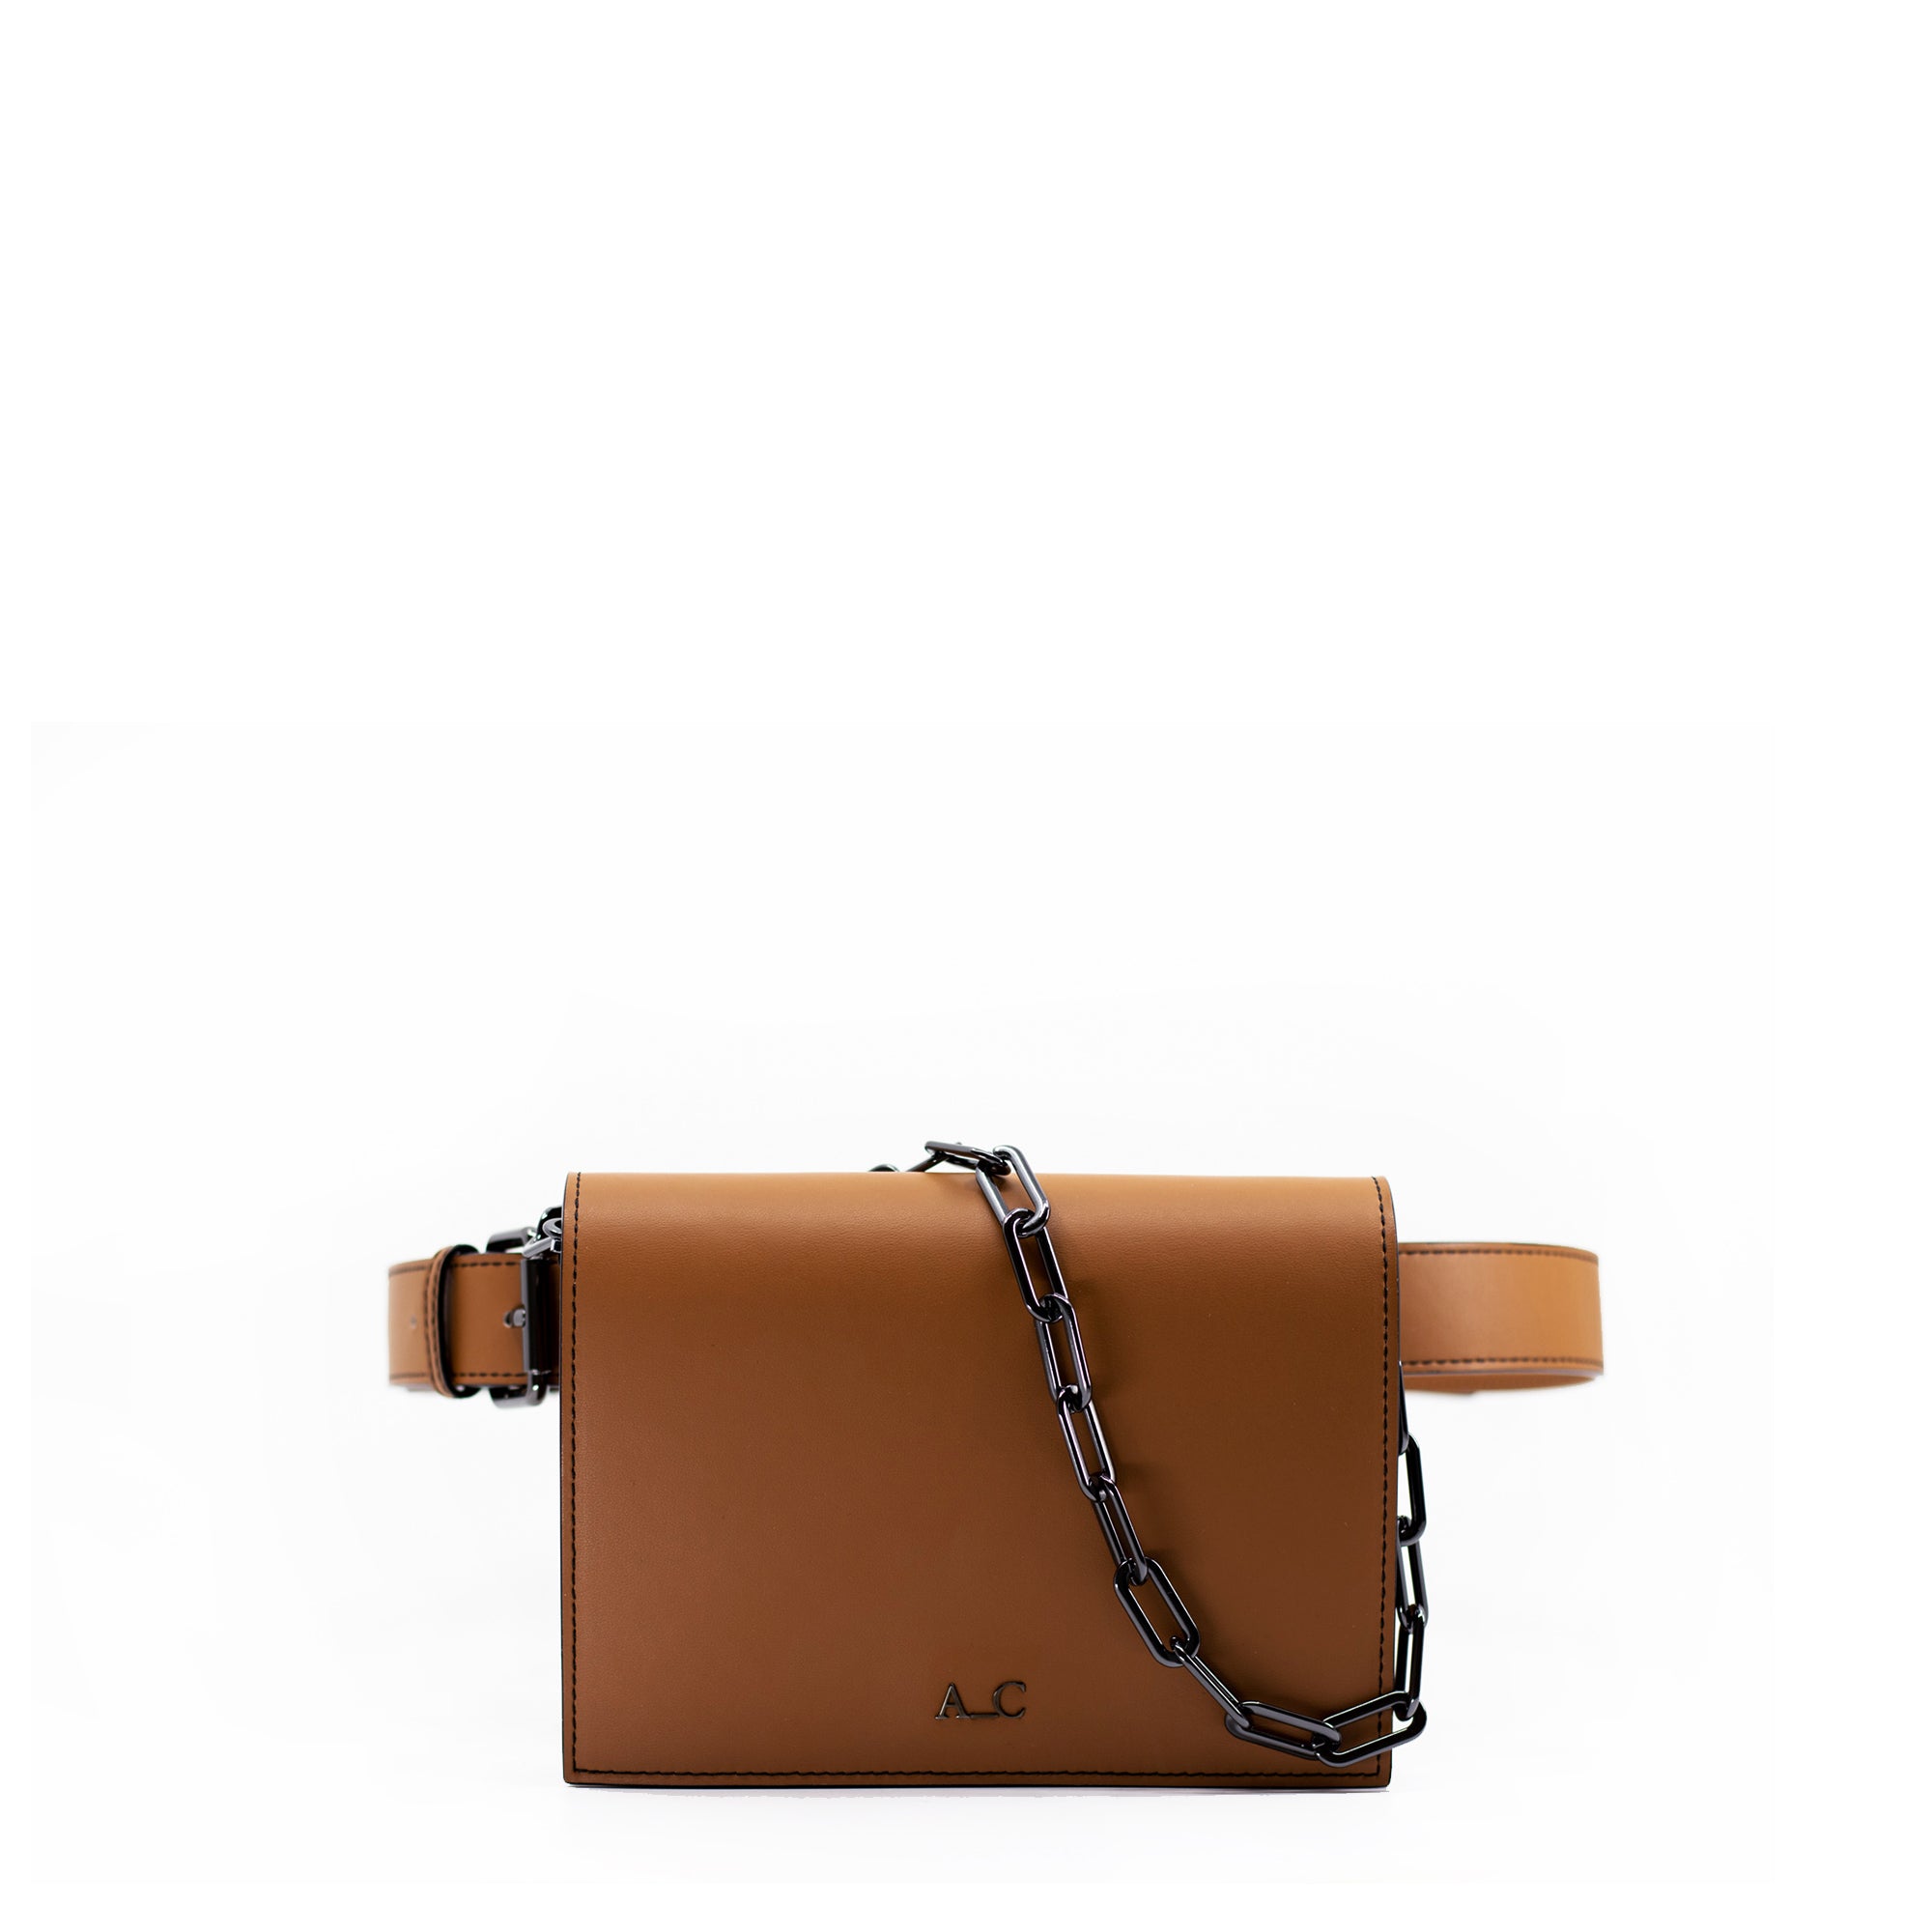 Tan Sustainable Leather Belt Bag with Best Selling Vegan Accessories – A_C Official